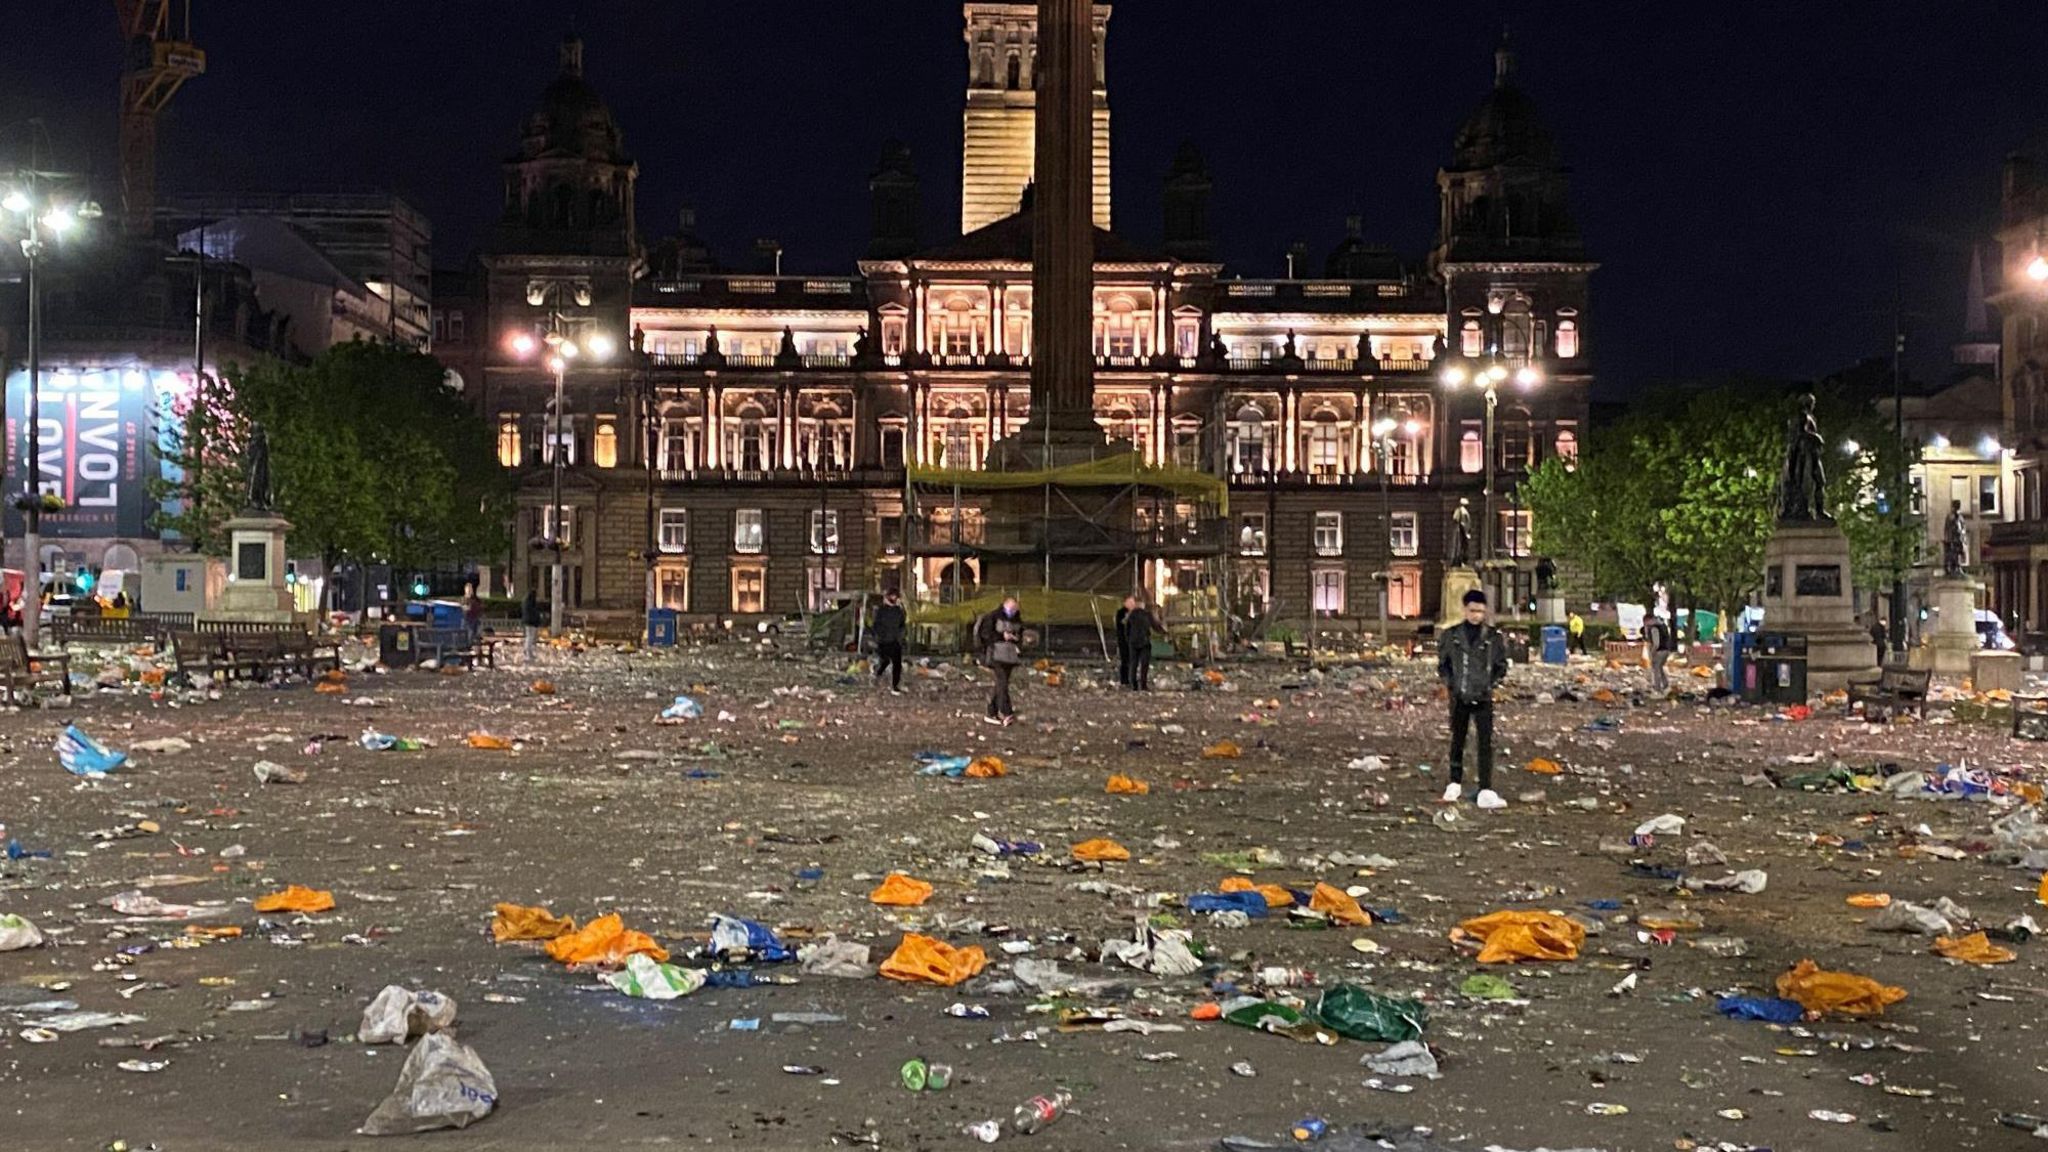 Glasgow's George Square following an unofficial Rangers fan event in May 2021